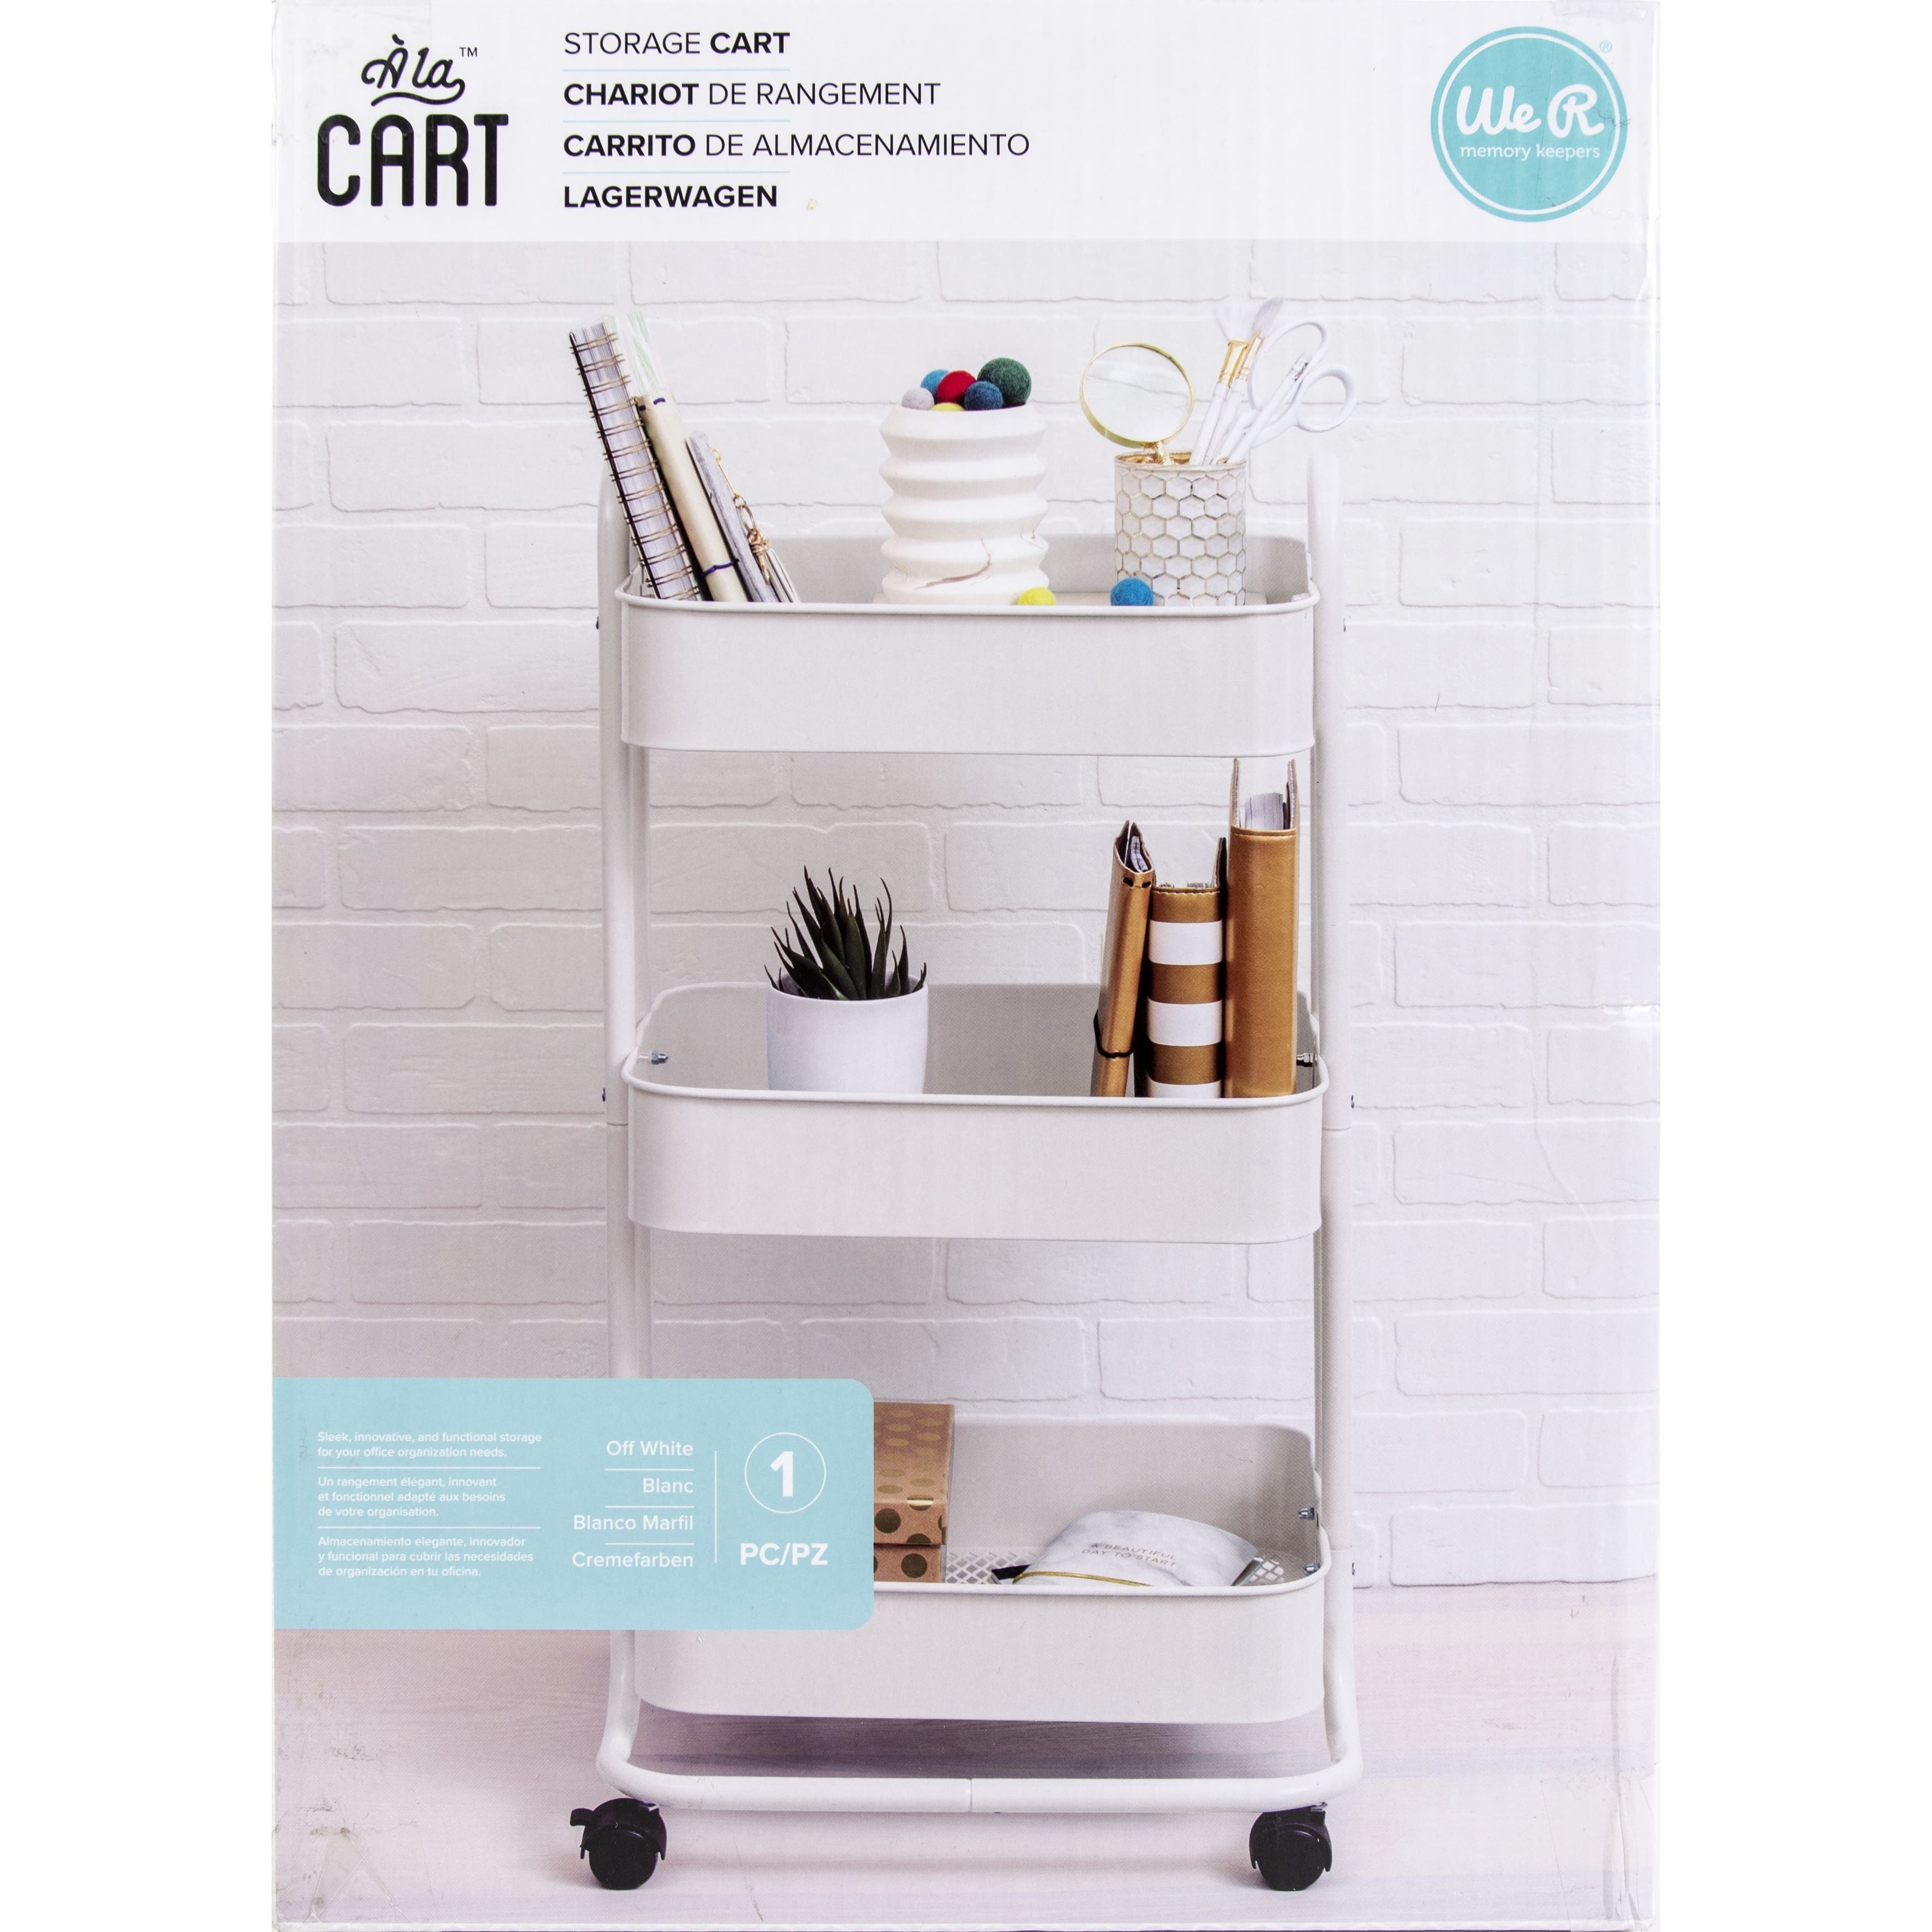 Details about   We R Memory Keepers 3-Tier Steel Rolling Storage Cart Pale Blue 